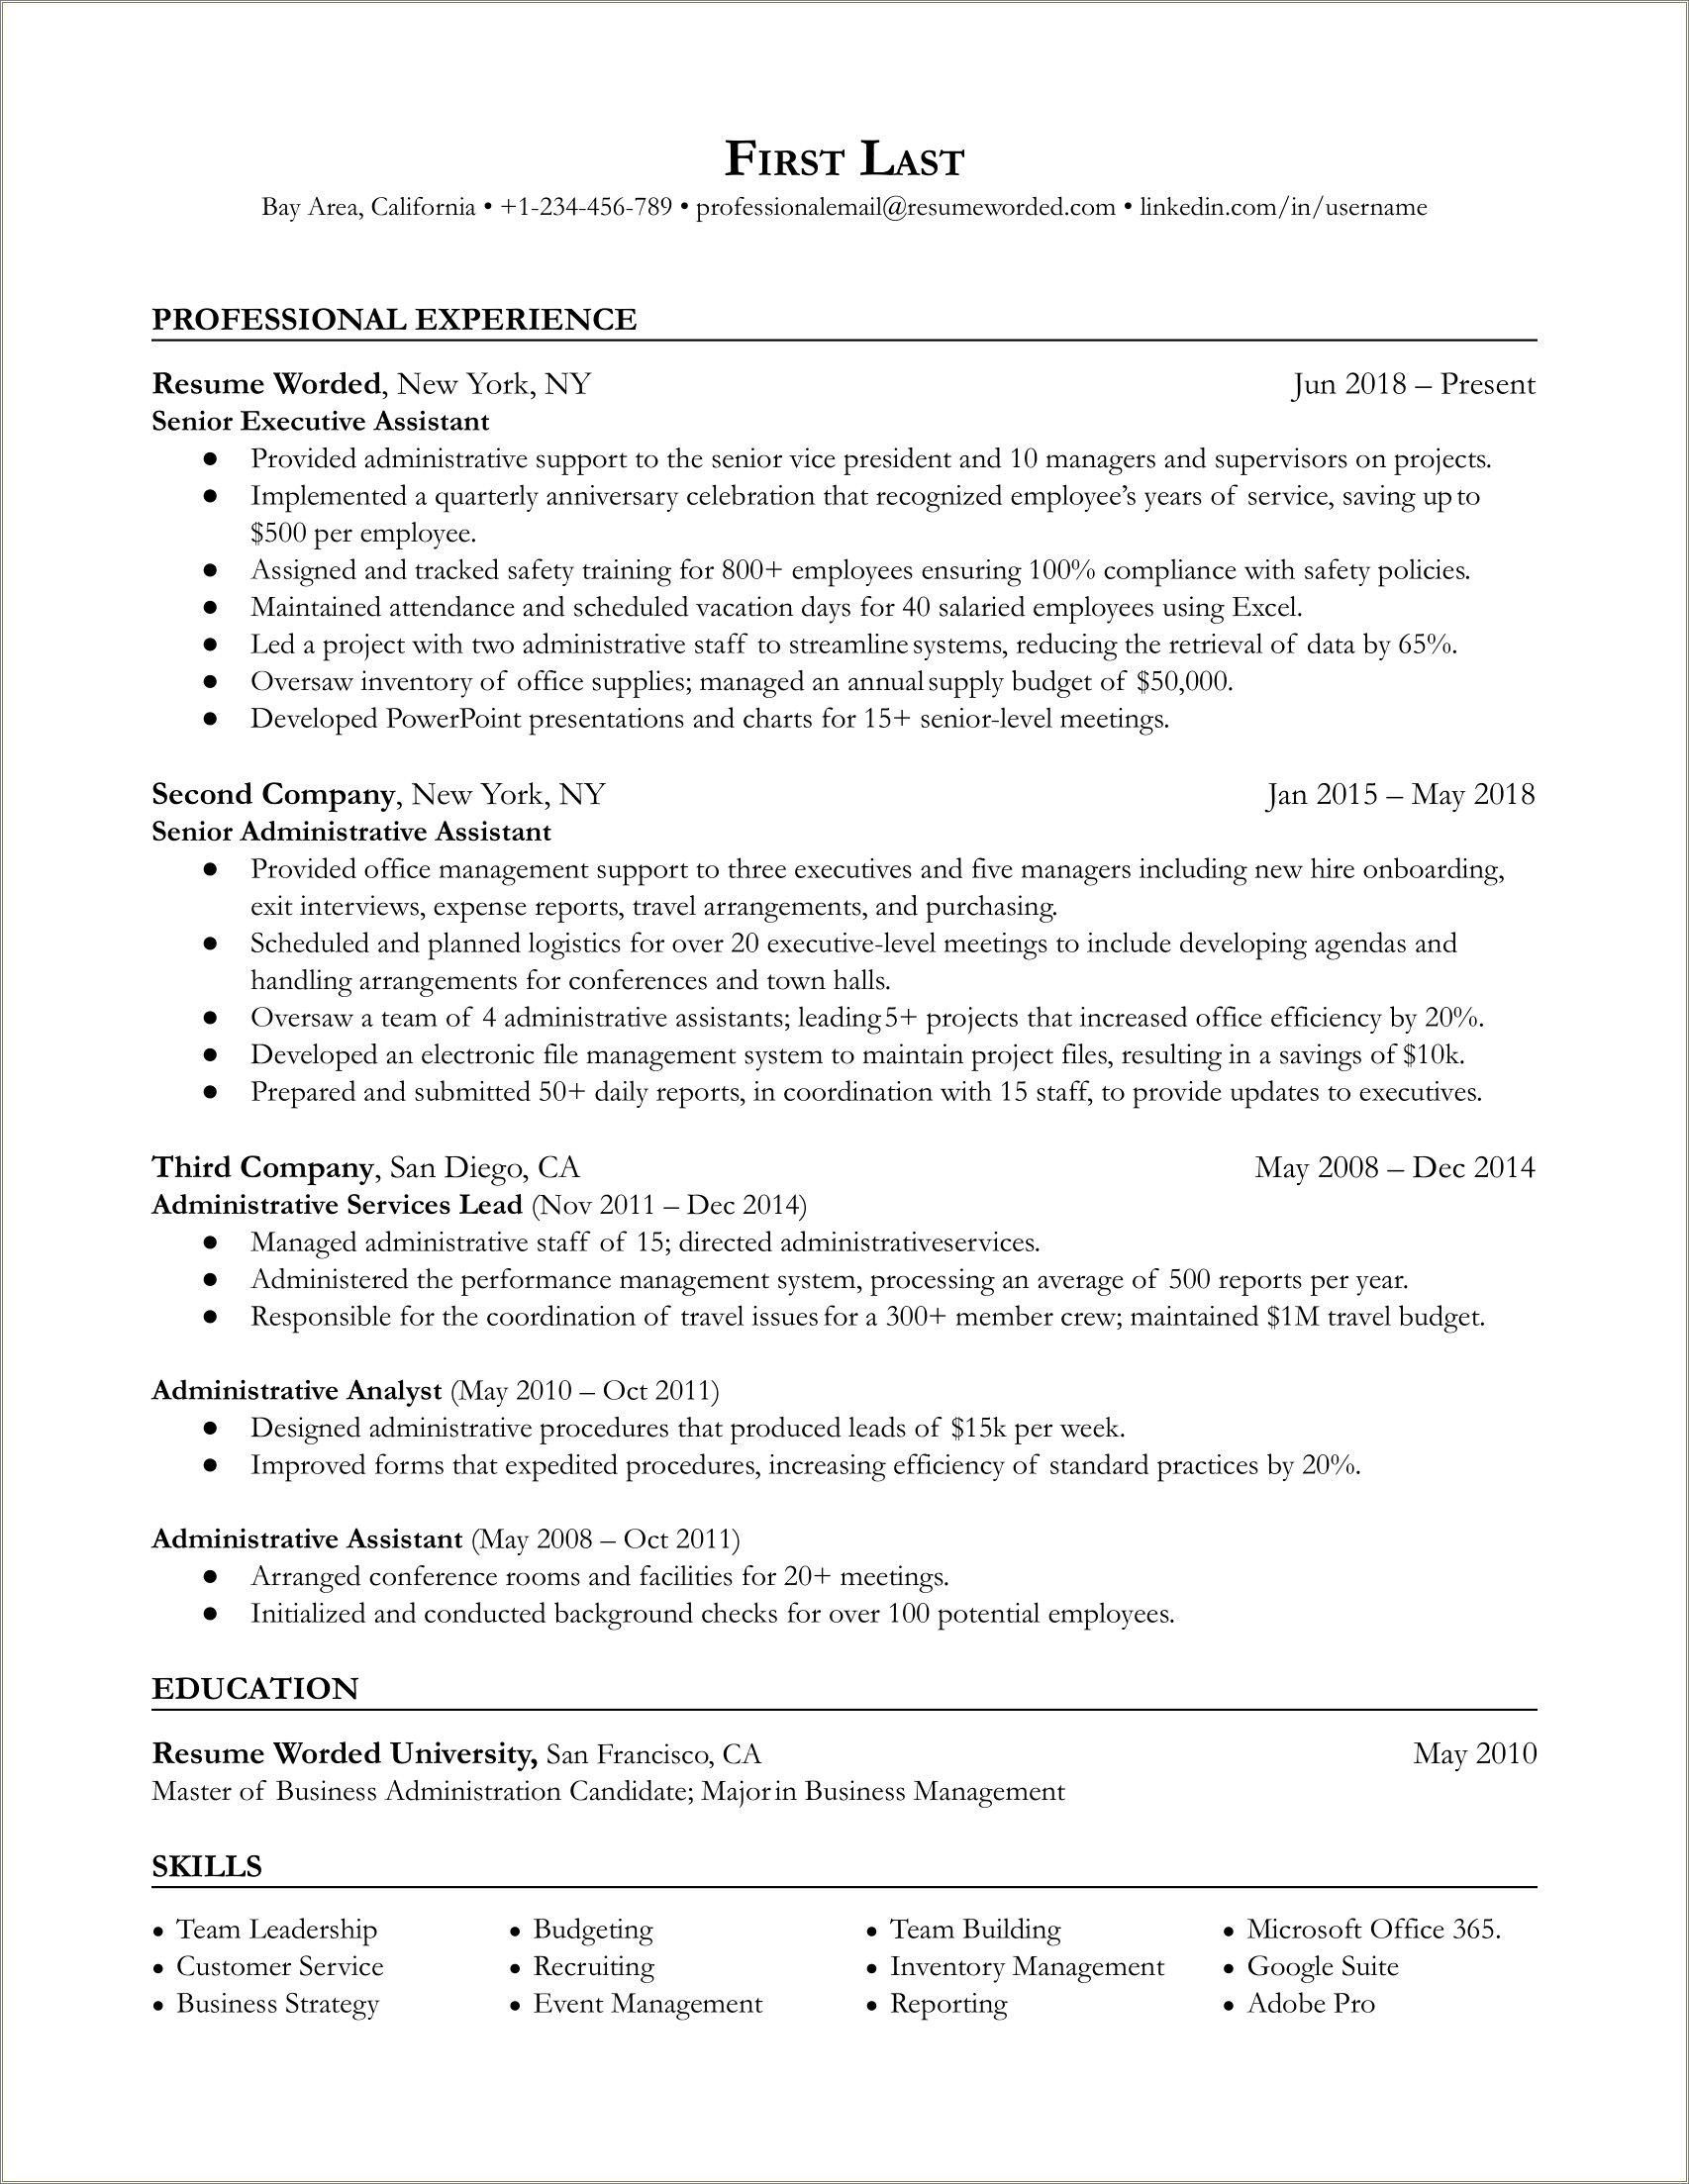 Executive Administrator Resume With Other Experience